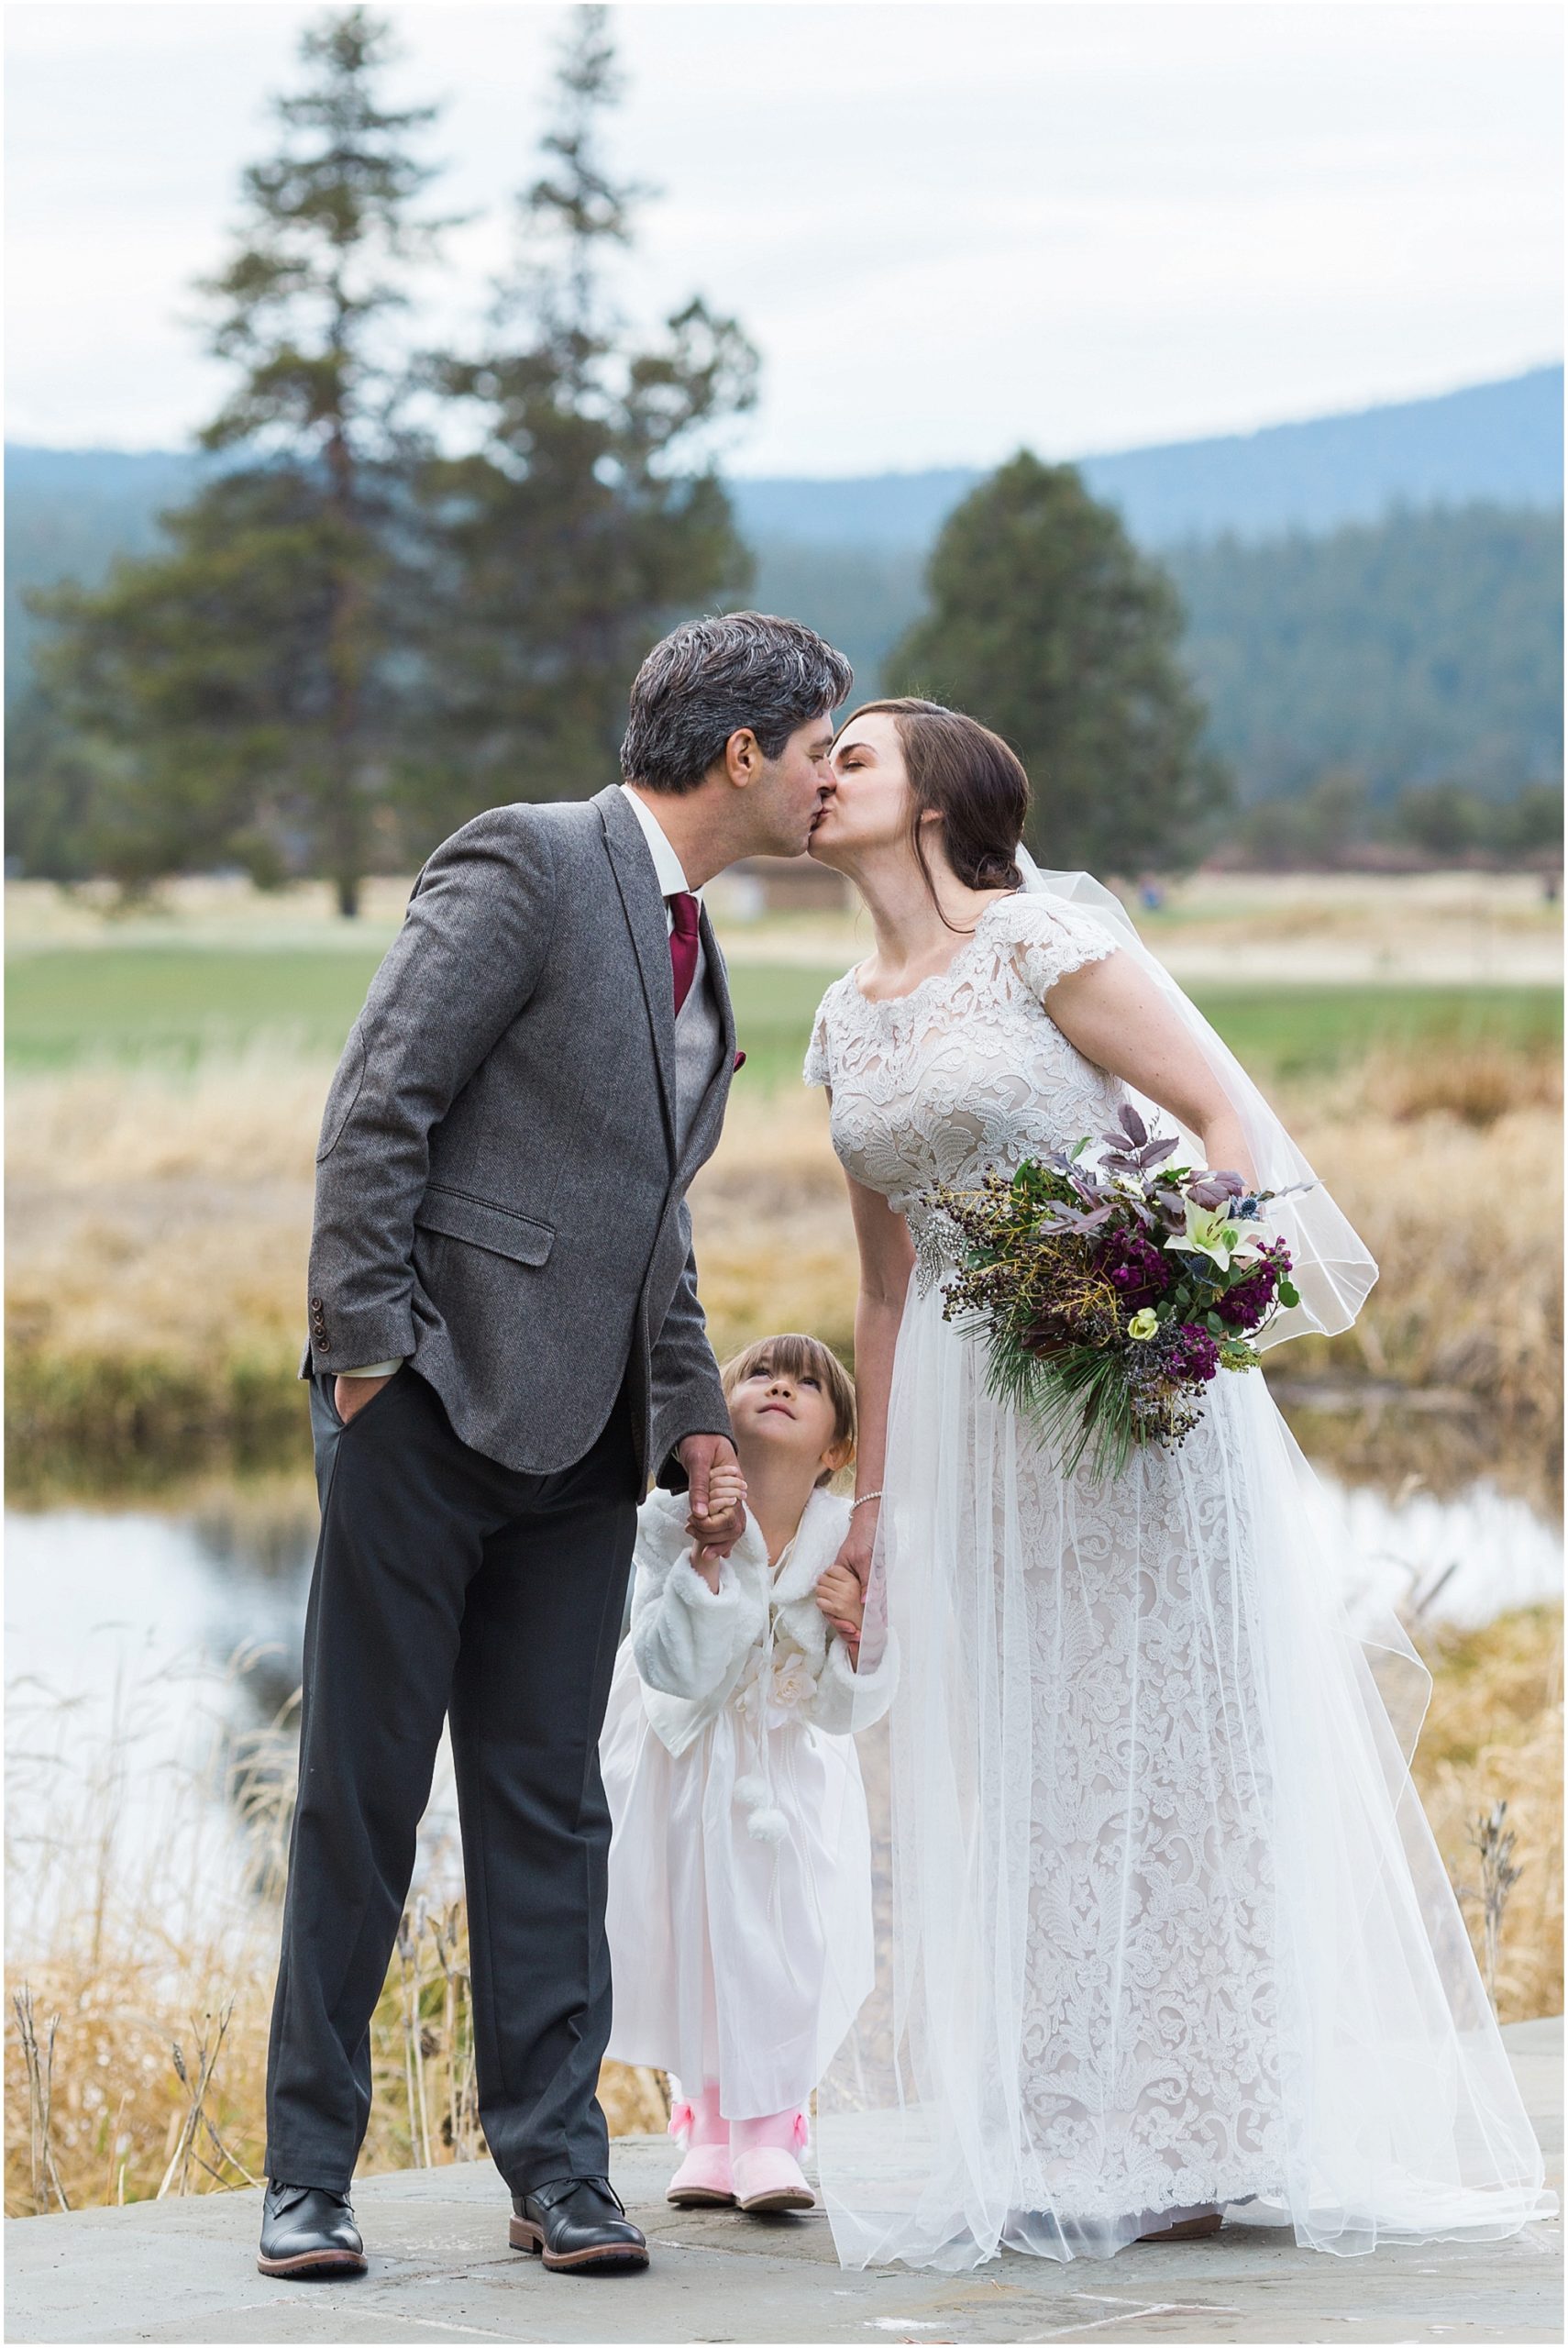 An adorable family portrait of the newly married couple kissing while their young daughter glances up all smiles at this wedding at Sunriver Resort in Oregon. | Erica Swantek Photography